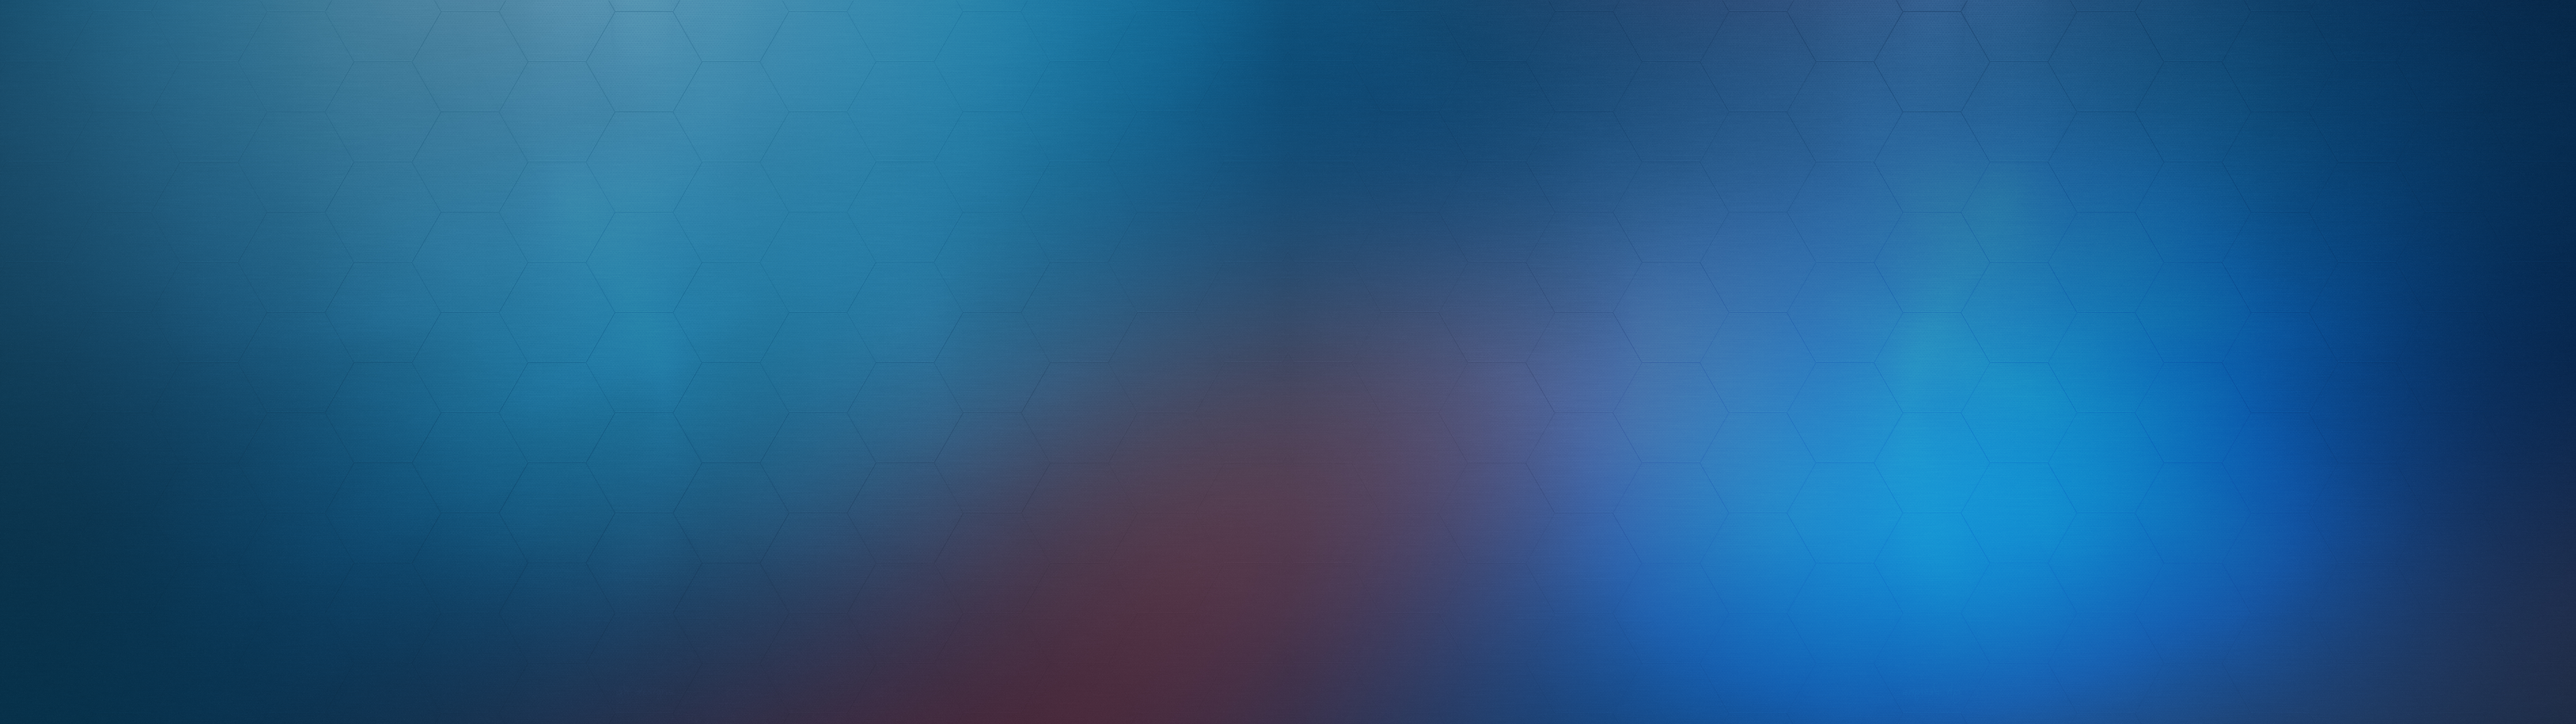 General 7680x2160 abstract minimalism Starkiteckt simple background multiple display